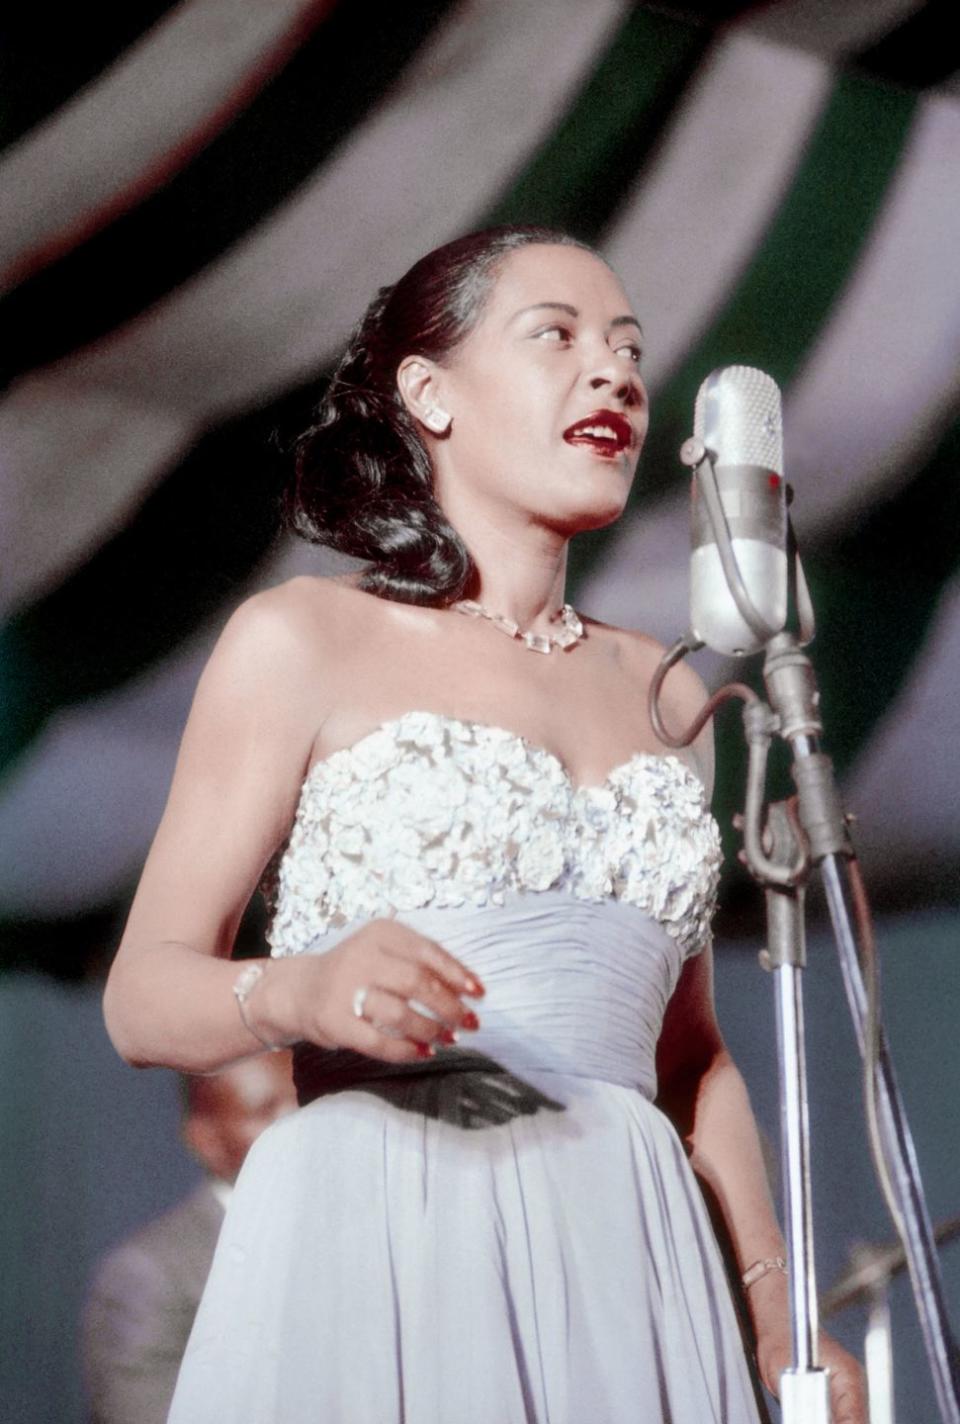 <p>Music legend Billie Holiday performing in a strapless powder-blue gown with an embellished bodice and a bright-red lip.</p>